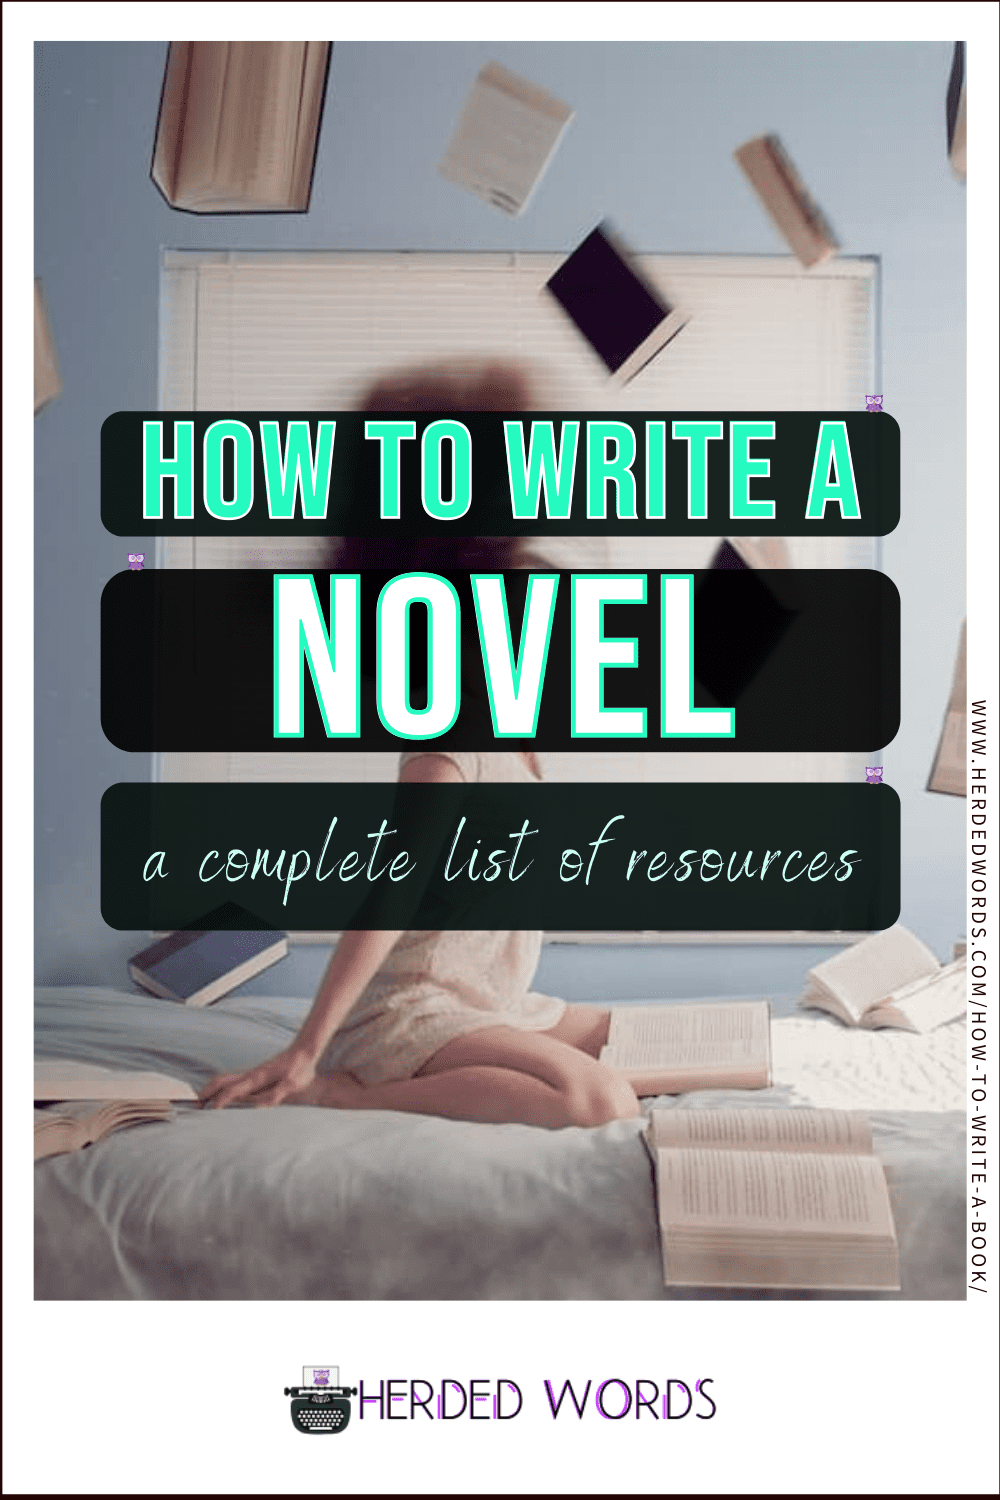 Image Link to How to Write a Novel (a complete list of resources)